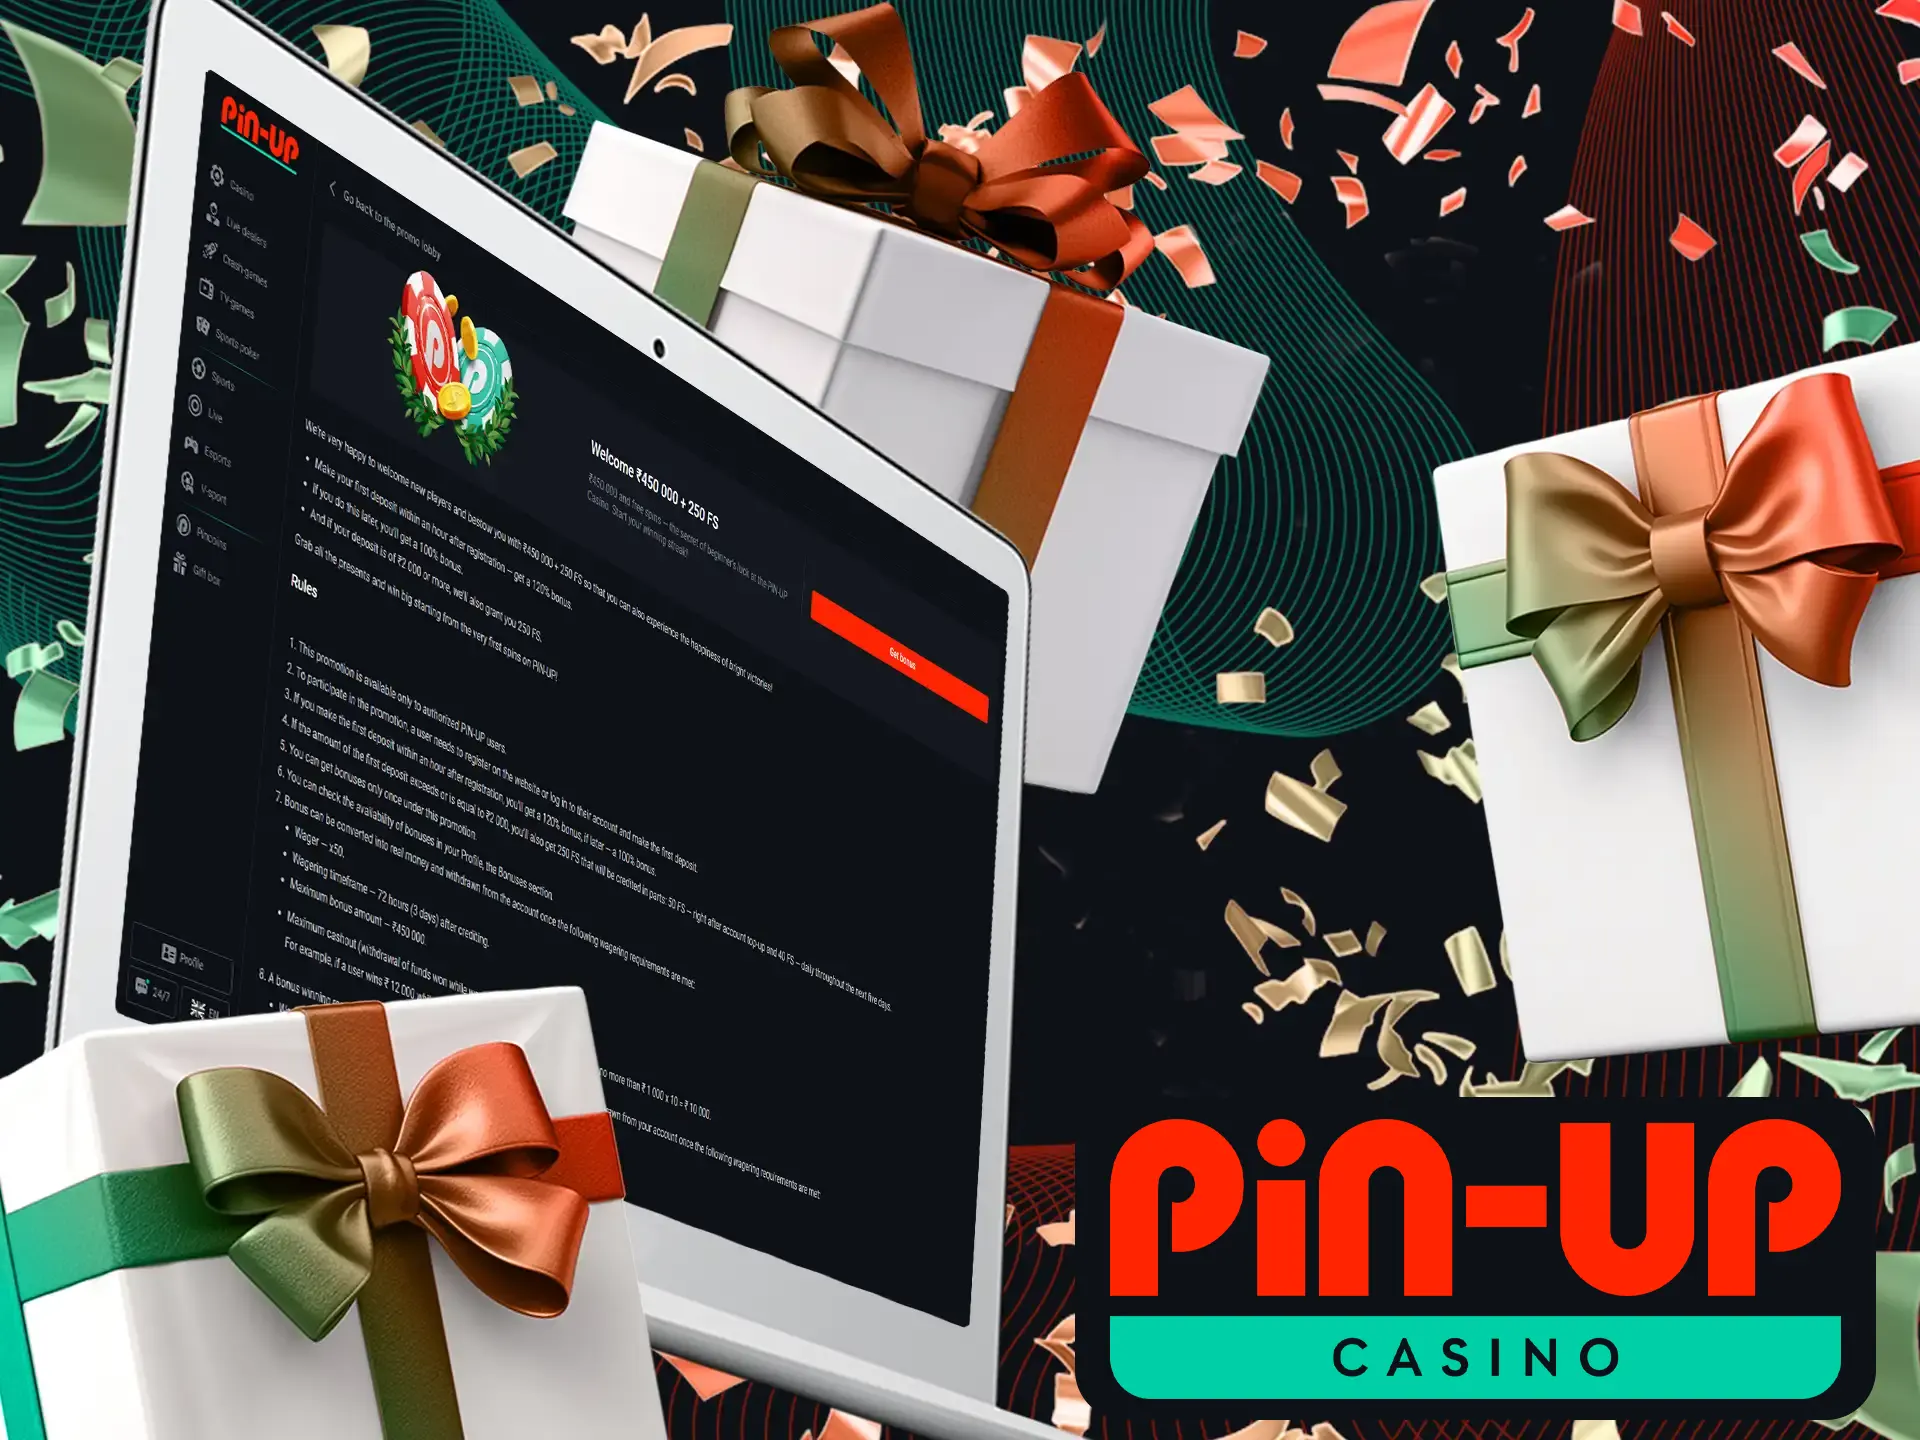 To receive a welcome bonus at Pin-Up, complete the quick registration and make a first deposit as a new user.